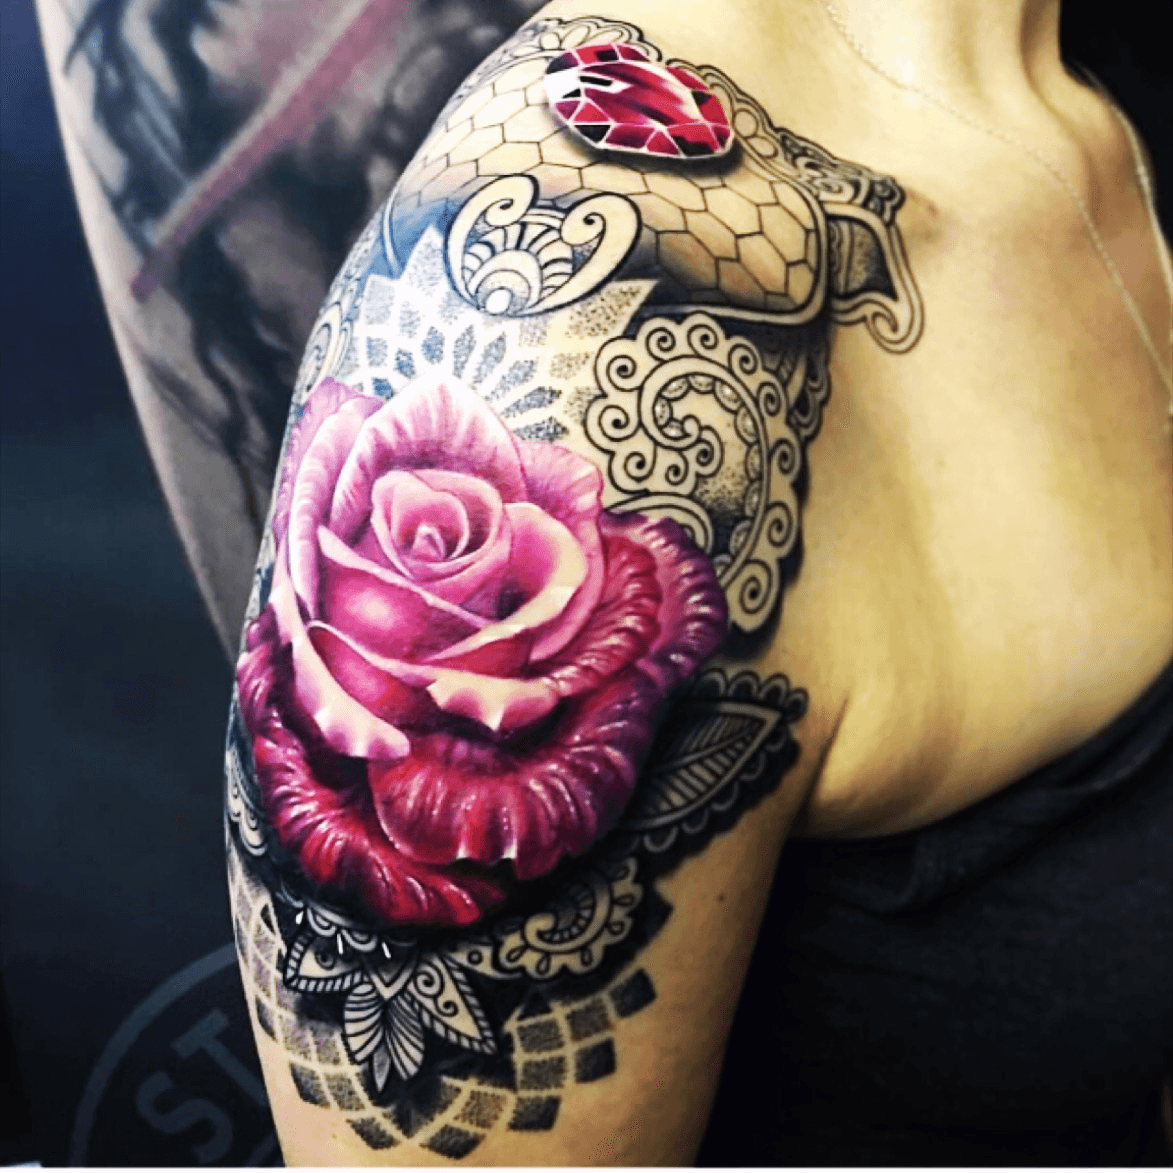 Lace and rose tattoo  Lace rose tattoos Rose tattoos Lace tattoo